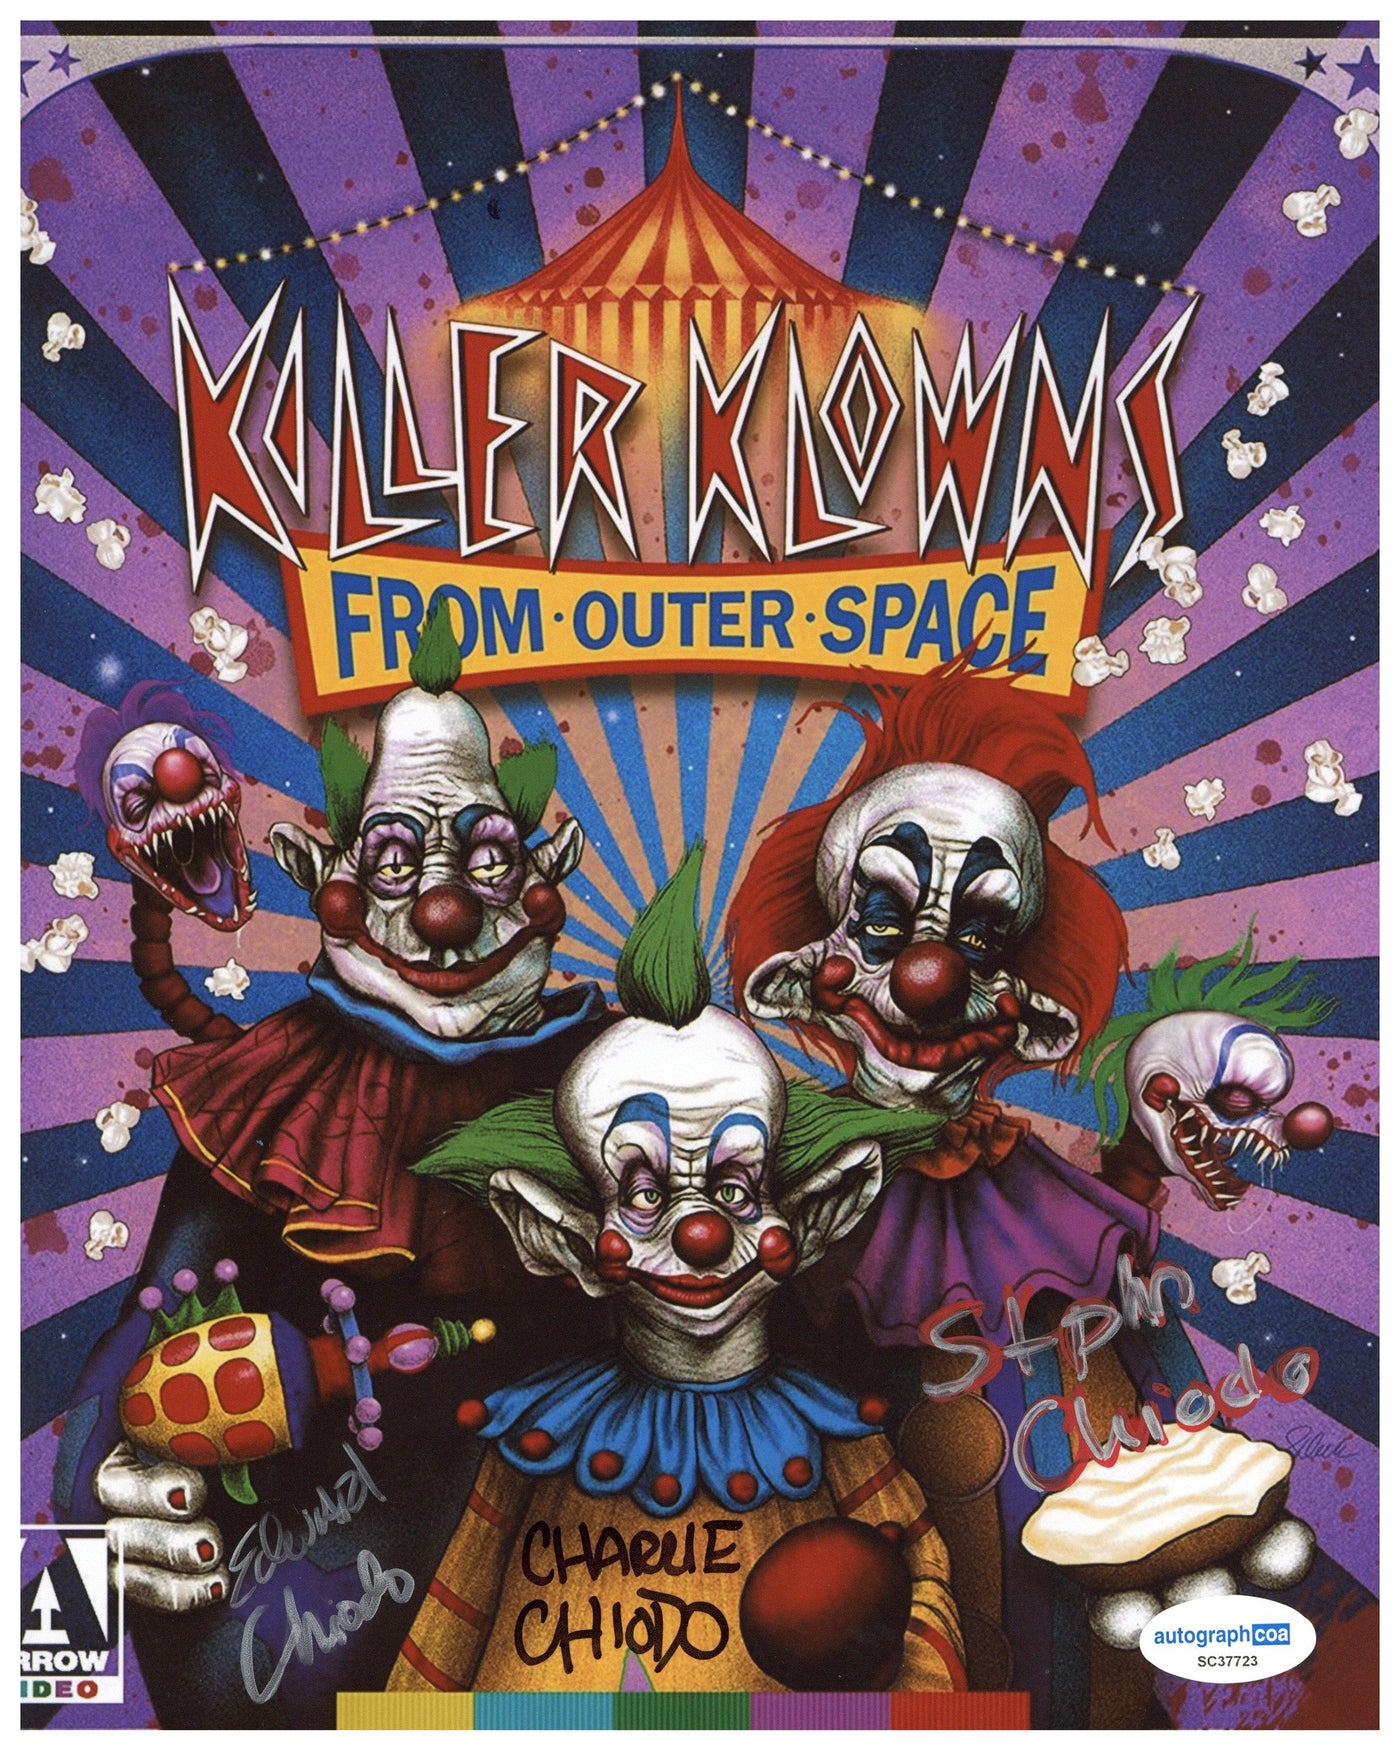 Chiodo Brothers Signed 8x10 Photo Killer Klowns From Outer Space Autographed ACOA